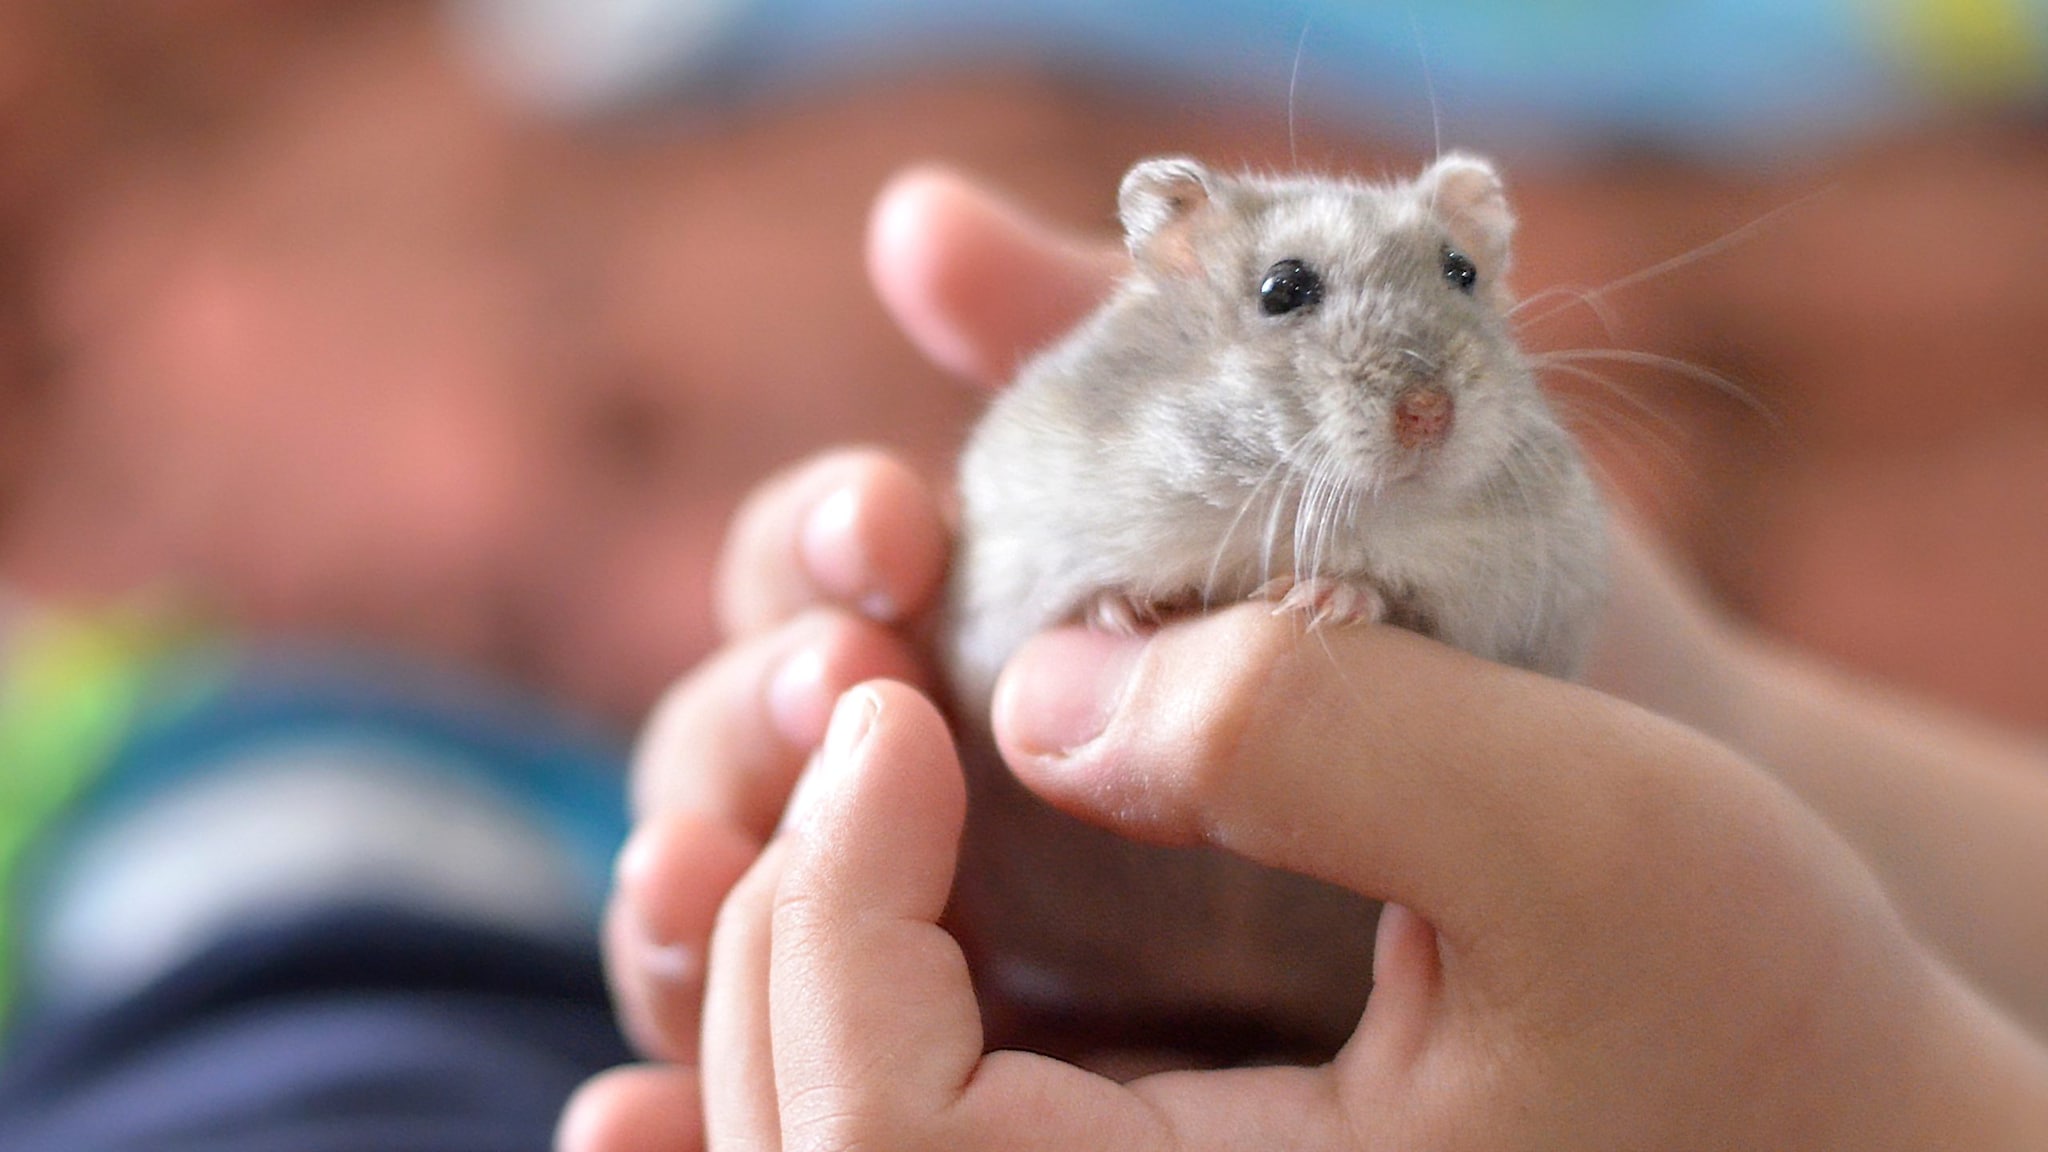 Small hands holding a hamster